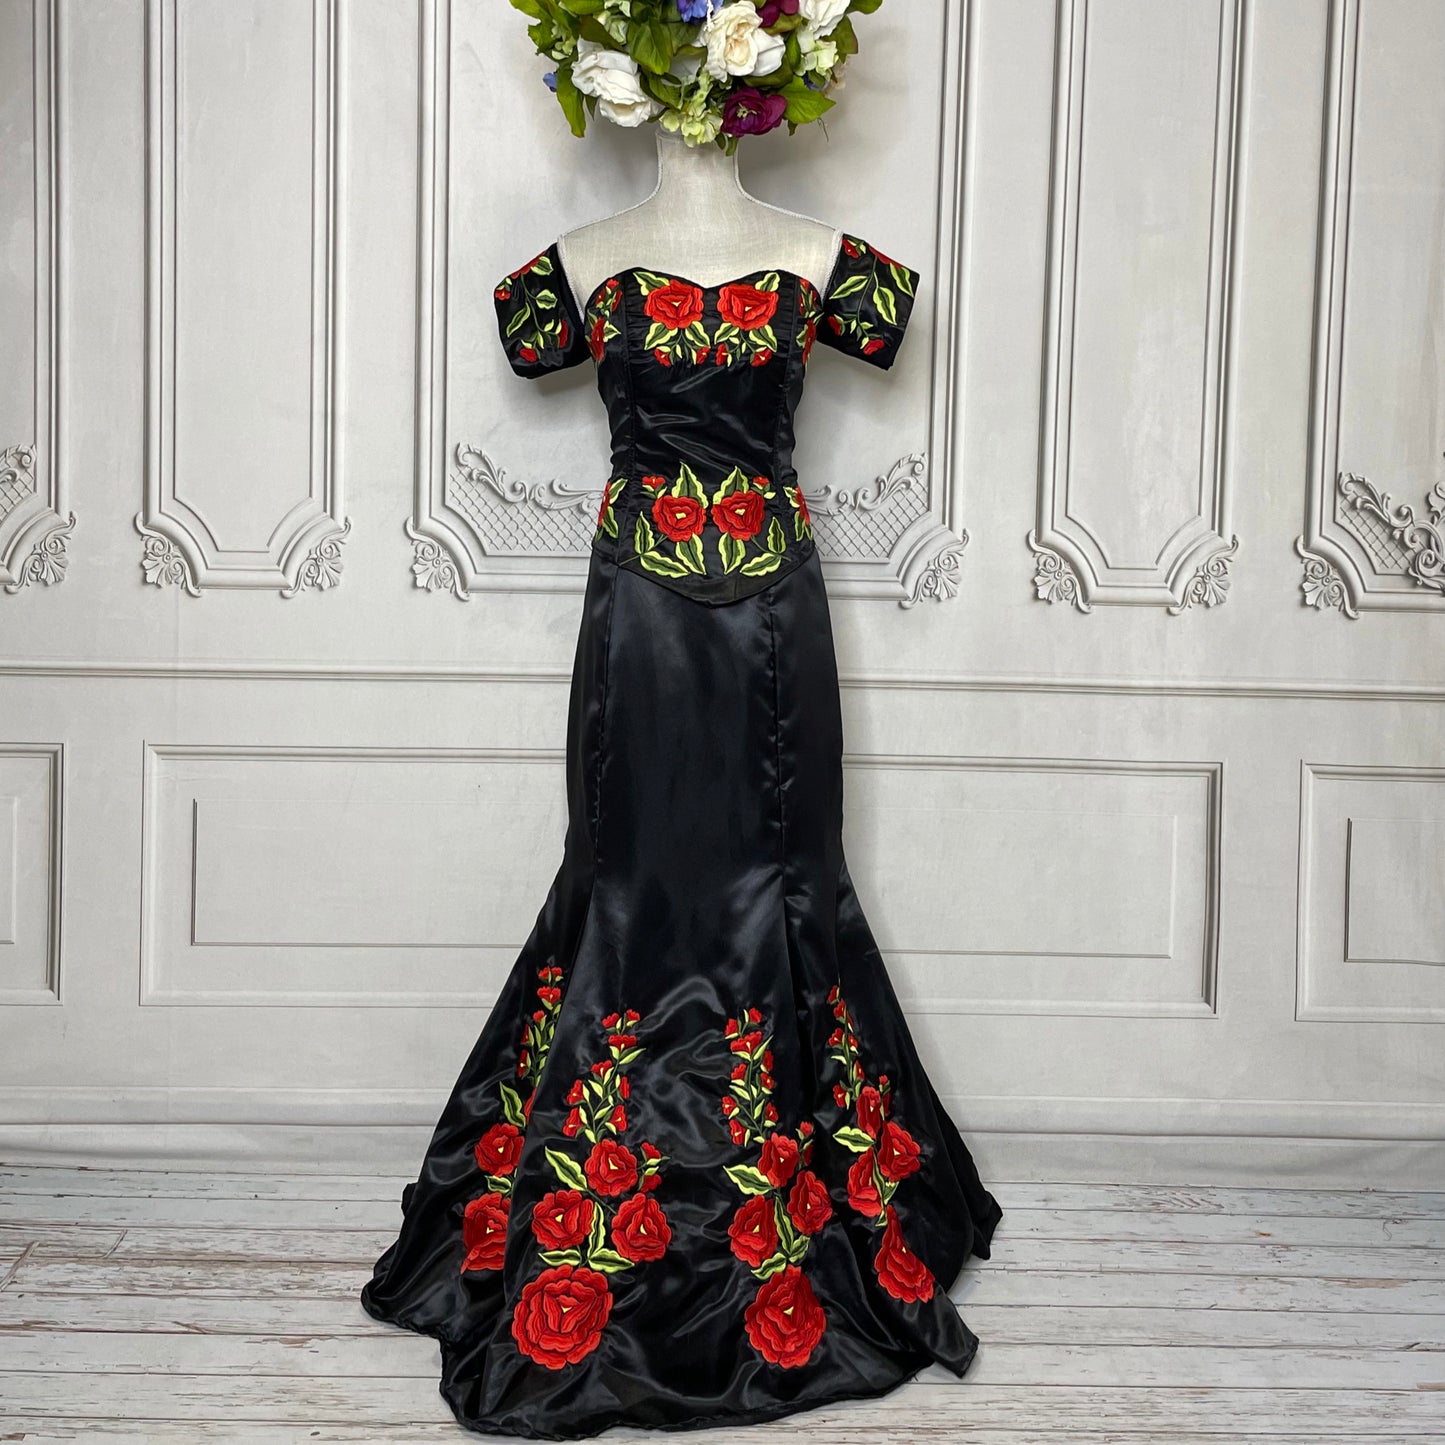 Embroidered Mexican Evening Dress - Red Roses Mermaid